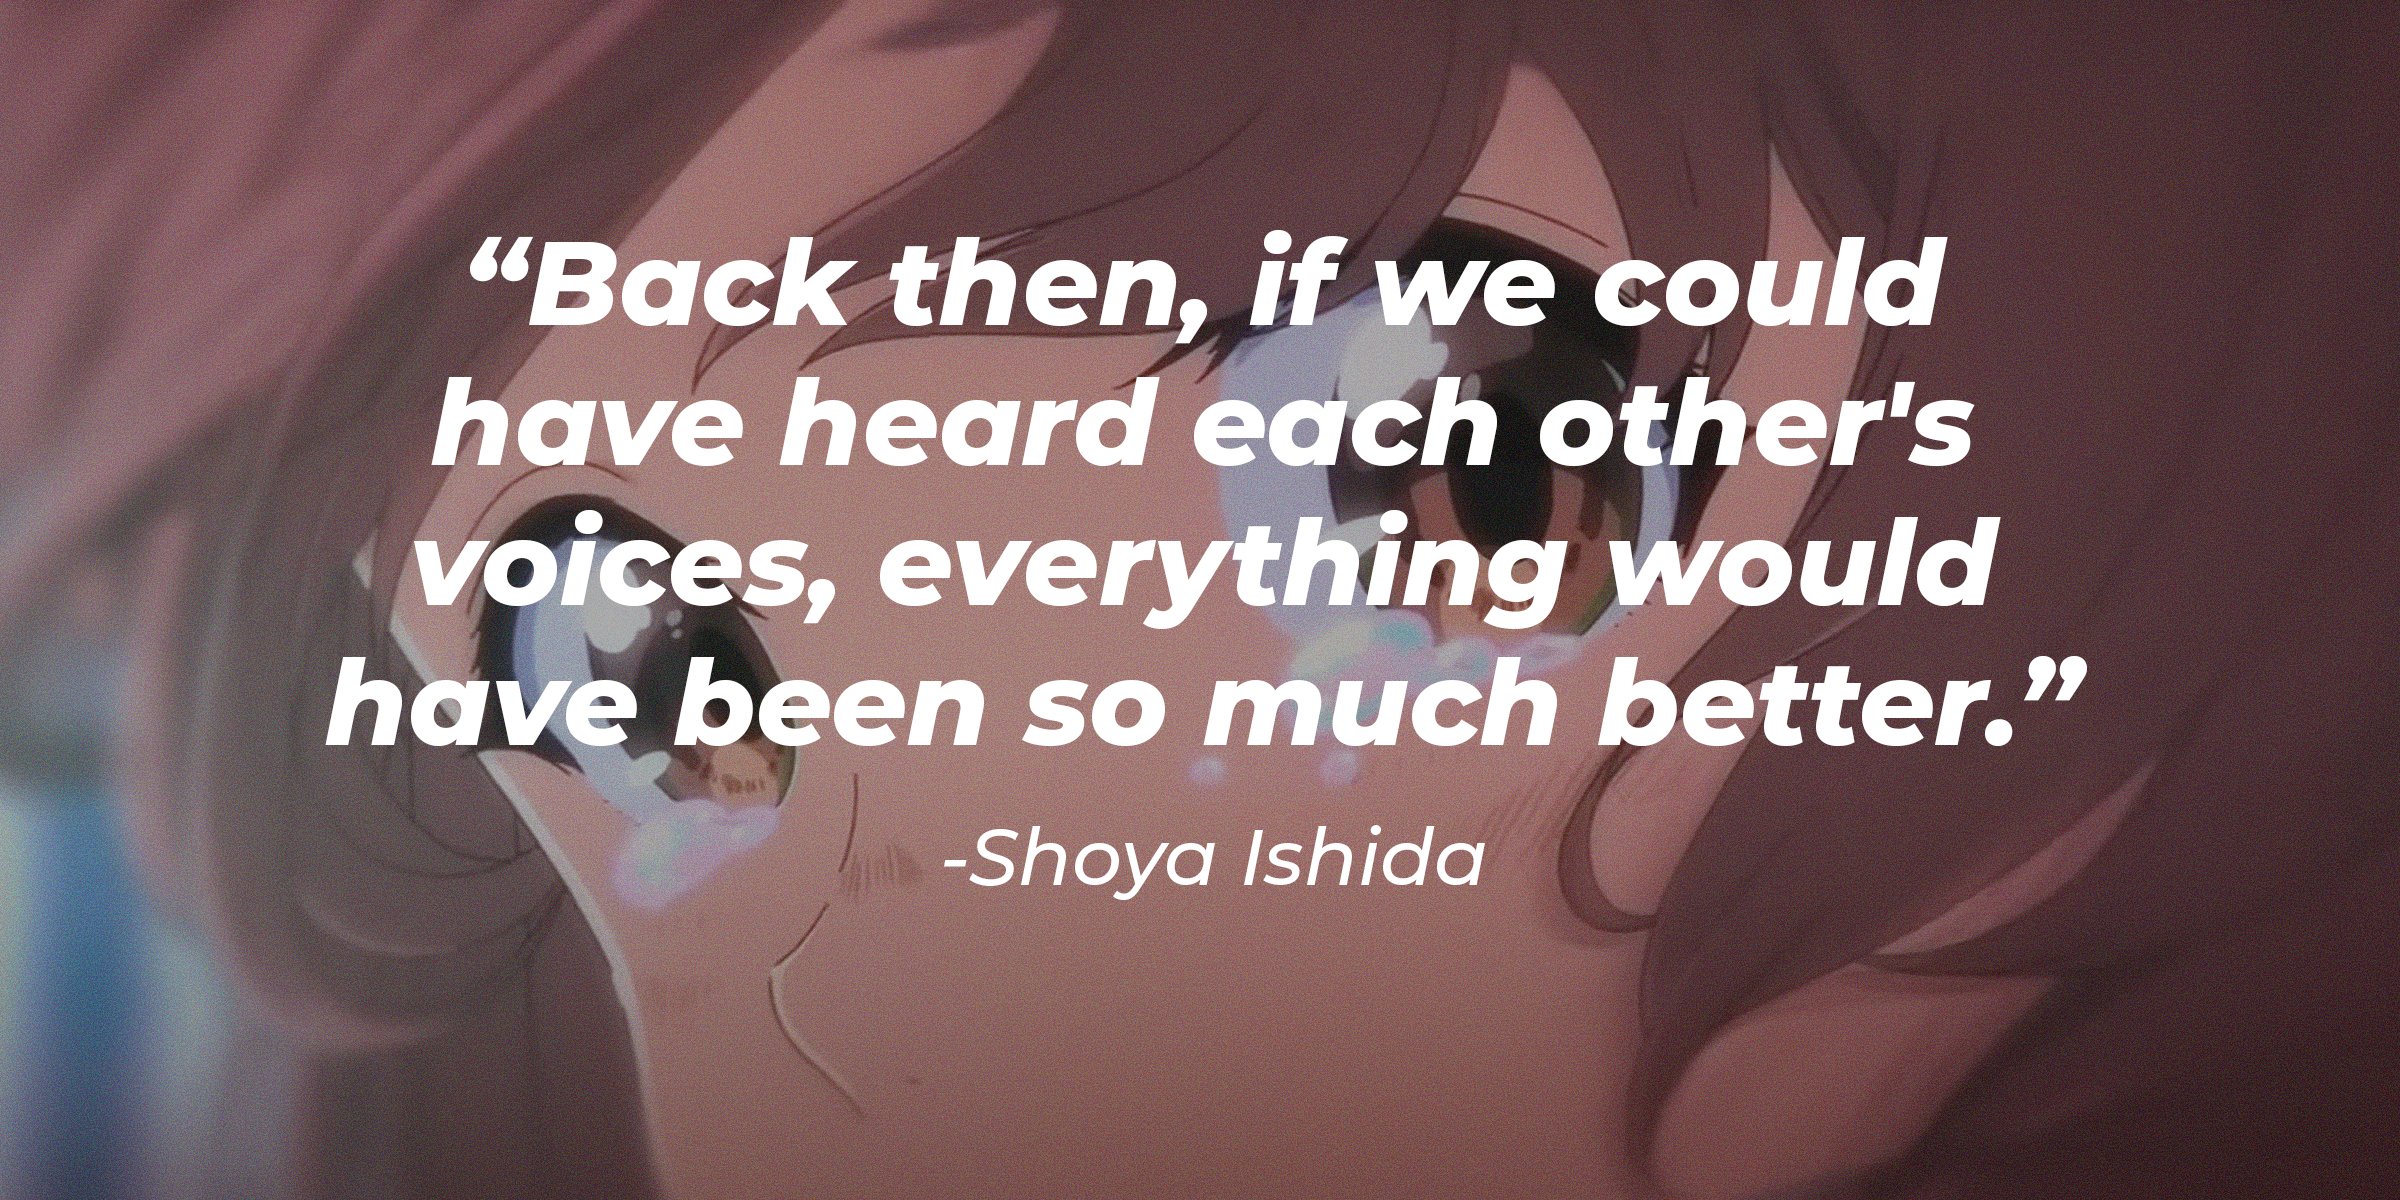 youtube.com/Crunchyroll Store Australia |  A teary-eyed Shouko with a quote by Shoya Ishida: “Back then, if we could have heard each other's voices, everything would have been so much better.”  